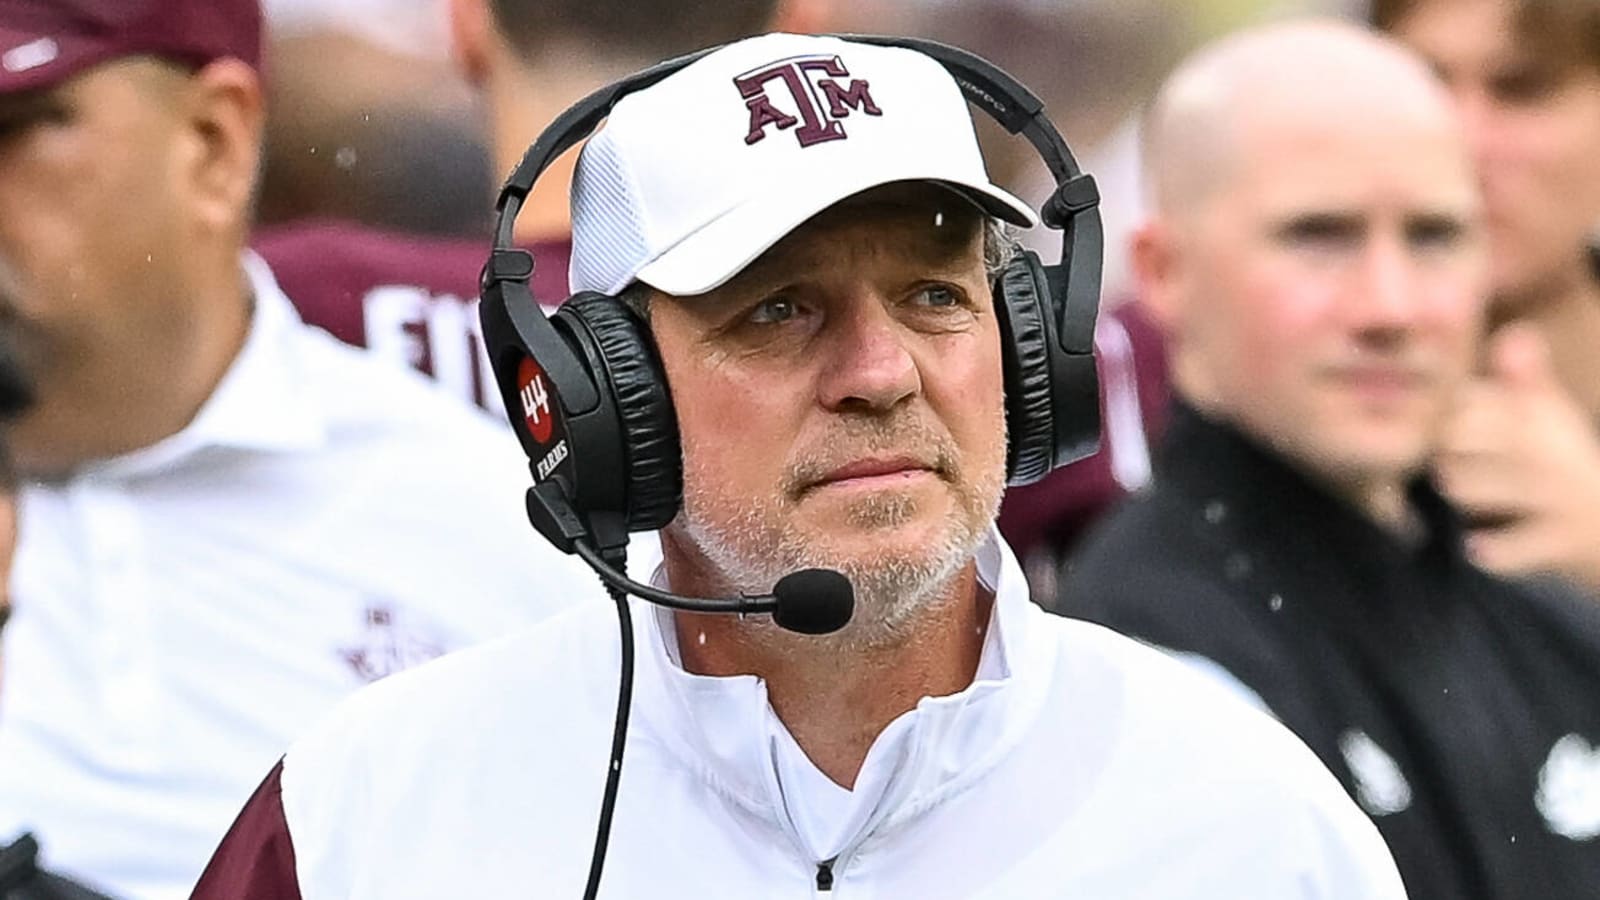 Texas A&M keeps taking losses to Appalachian State